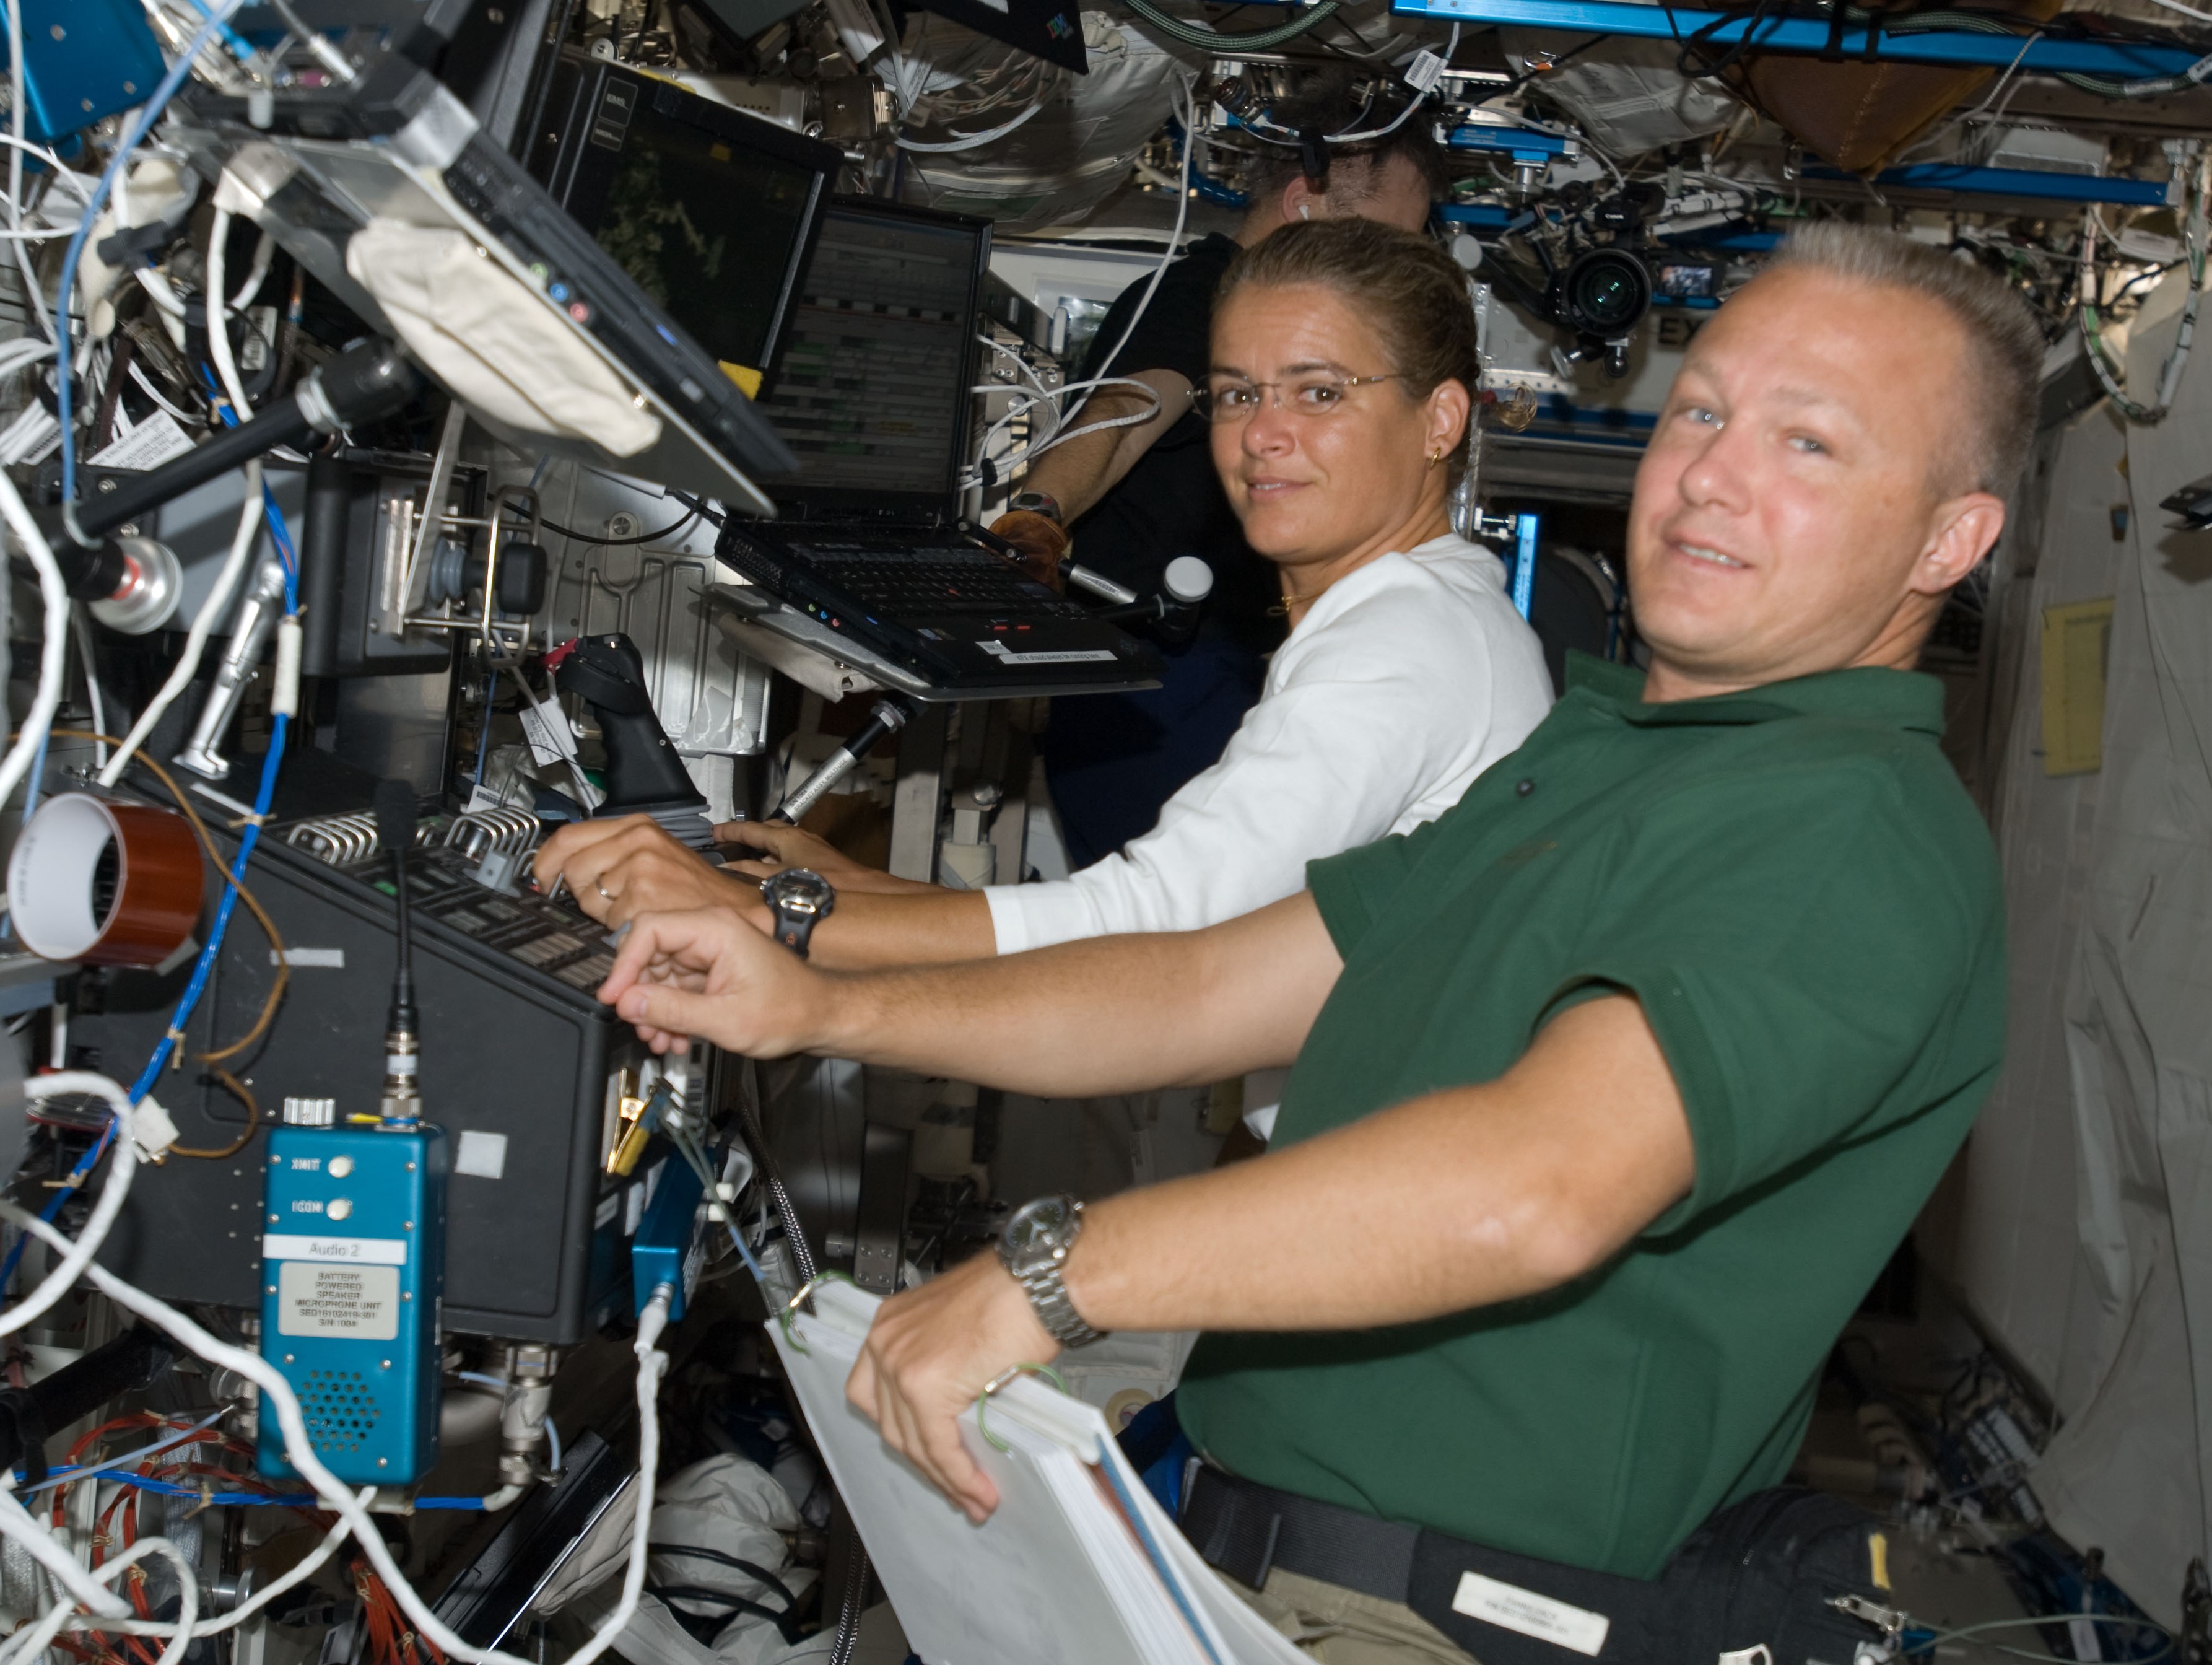 Canadian Space Agency astronaut Julie Payette, left, and NASA astronaut Douglas G. Hurley operate the station's robotic arm during the fourth spacewalk